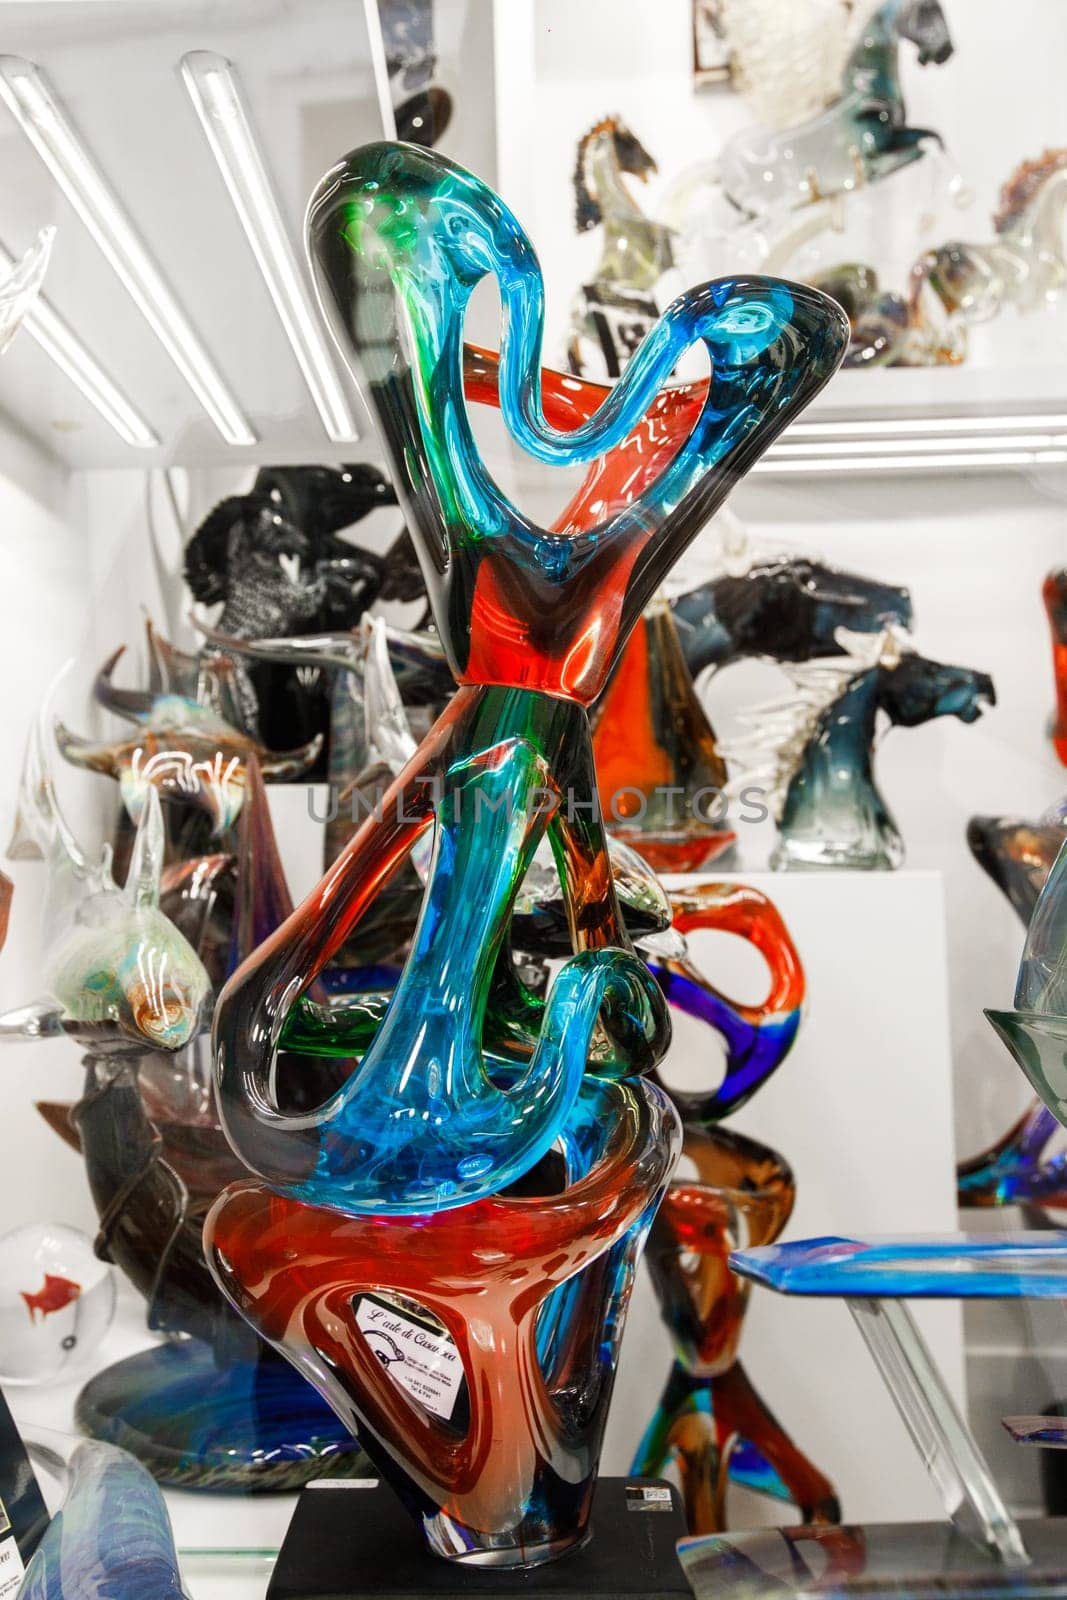 Venetian glass products on display art. High quality photo